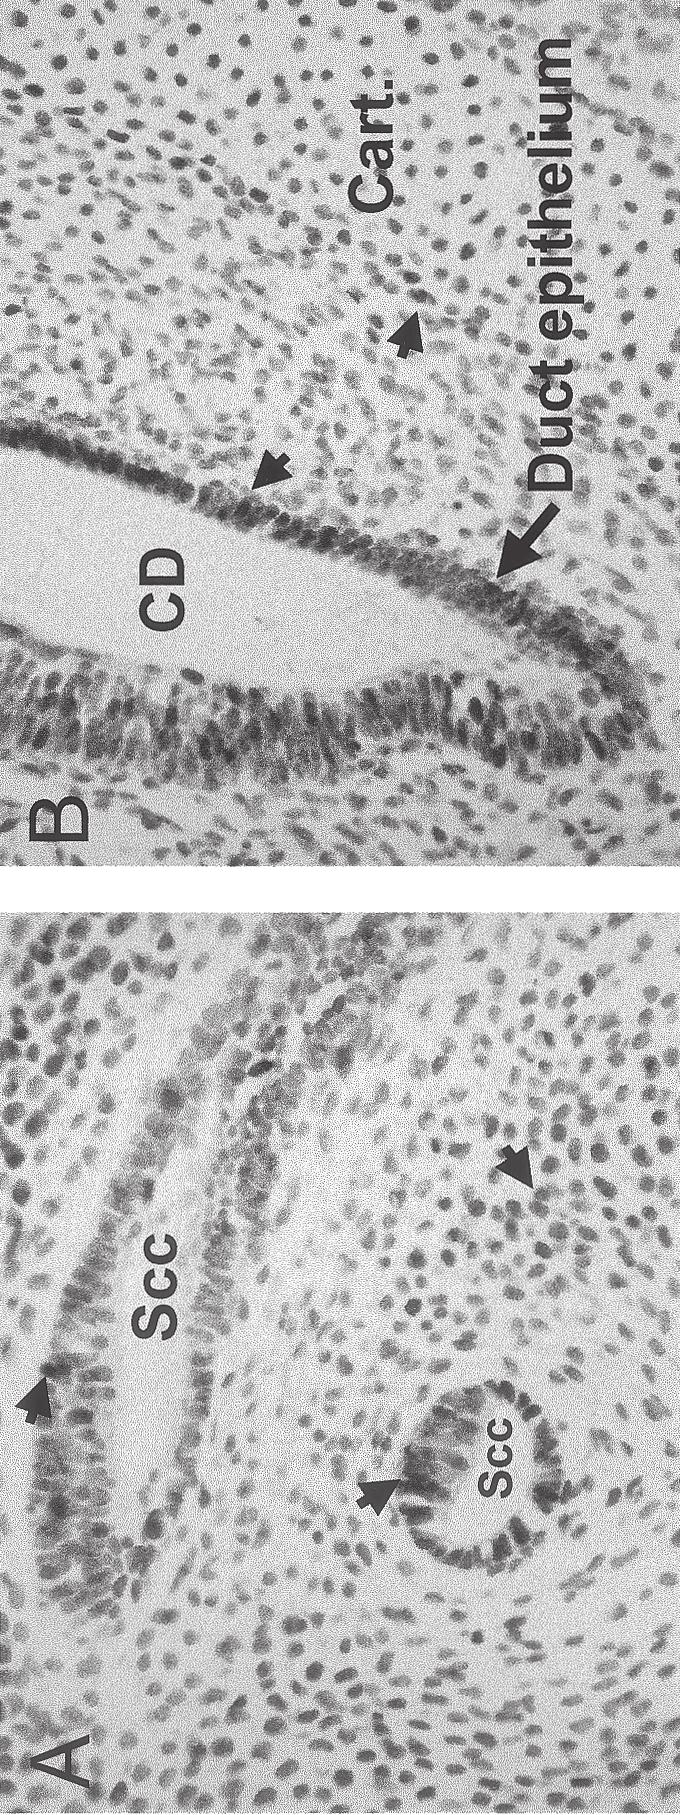 TUNEL Assay: Overview of Techniques 27 Fig. 4. Micrographs of TUNEL-stained mouse embryo tissue undergoing developmental restructuring (E11 12). (A) Semicircular canal area.